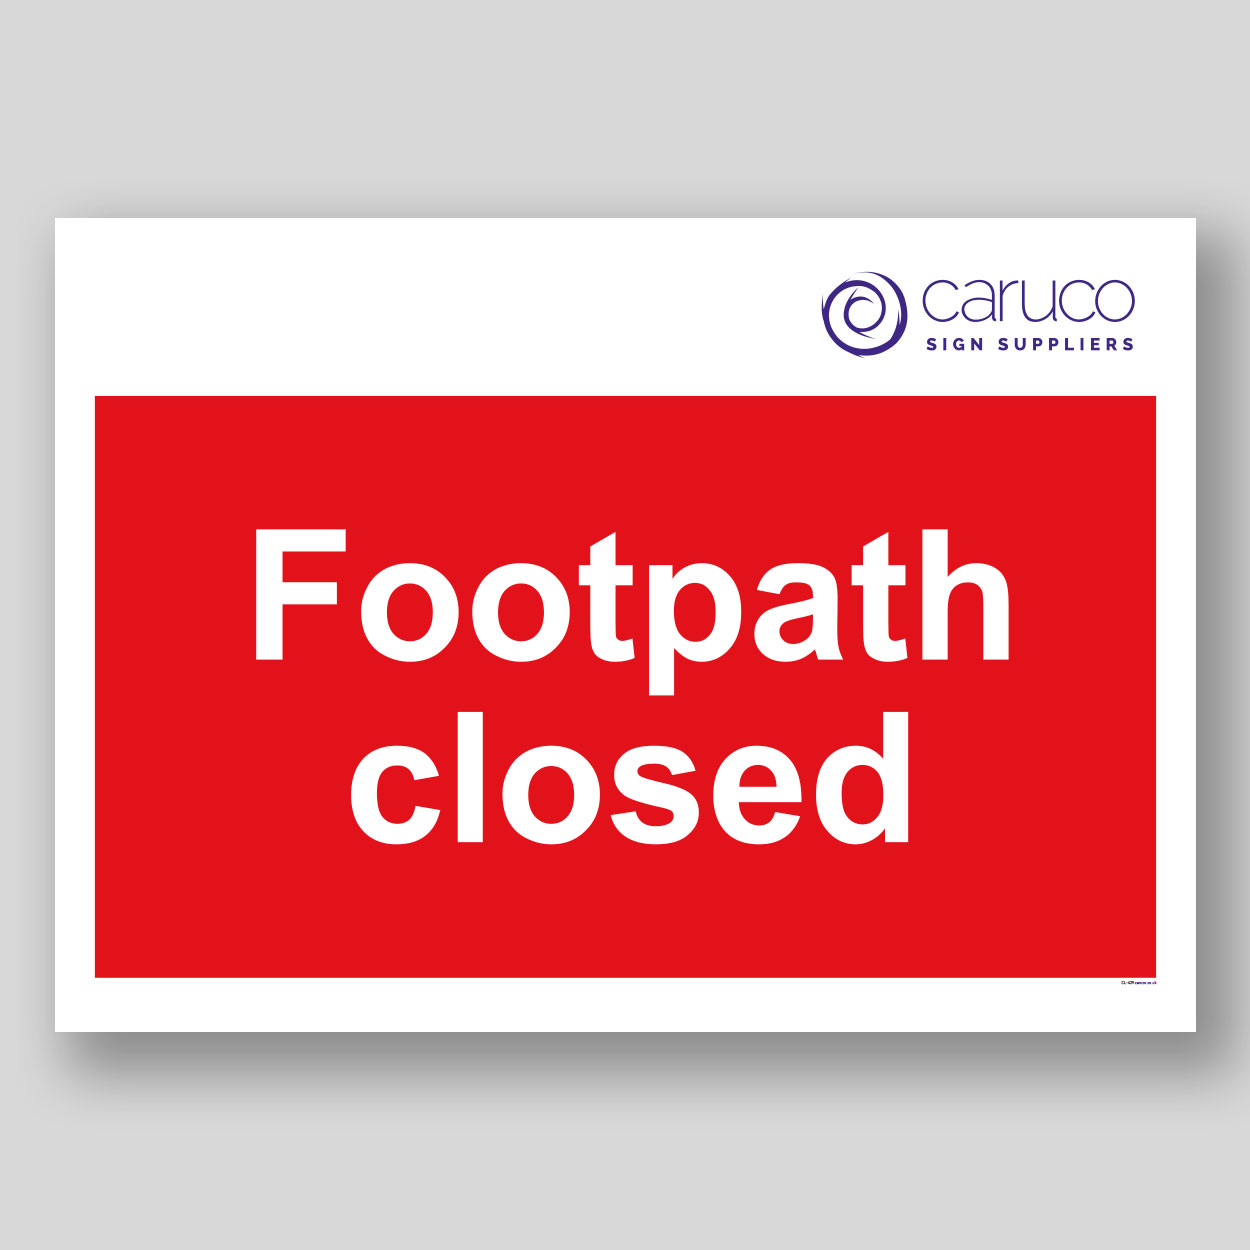 CL-439 Footpath closed